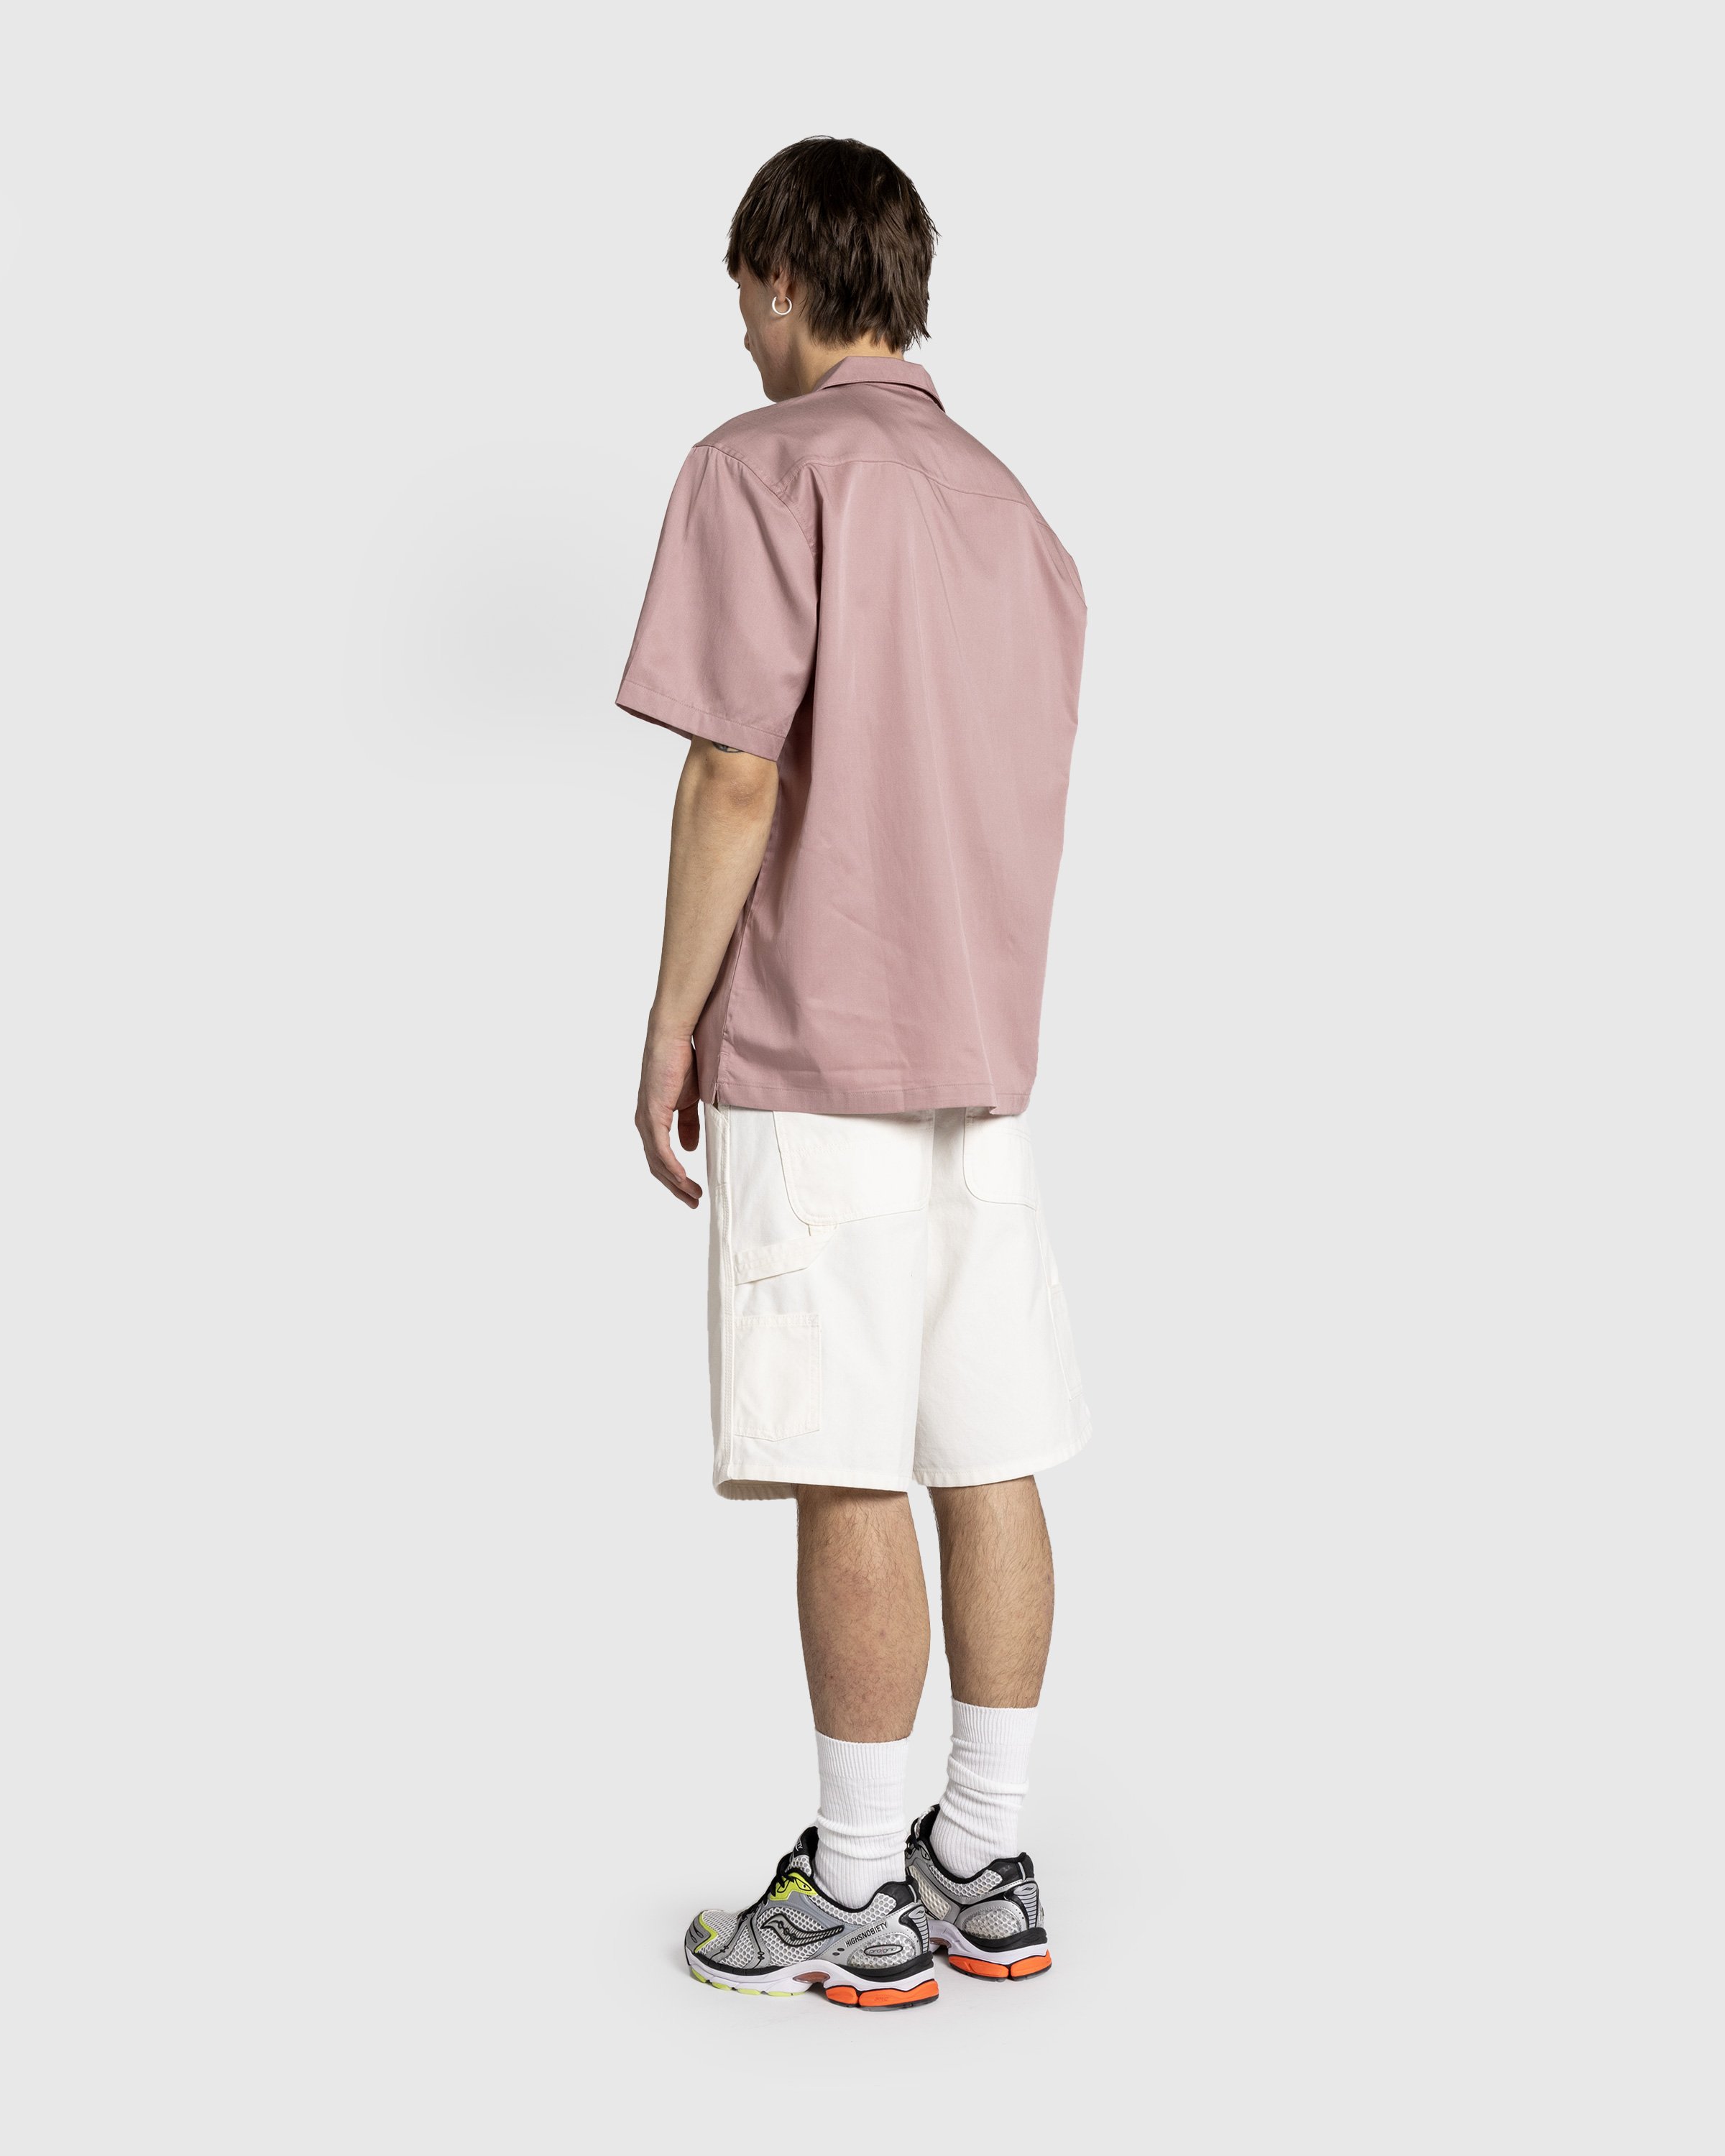 Carhartt WIP - S/S Delray Shirt Glassy Pink / Black - Clothing - Pink - Image 4